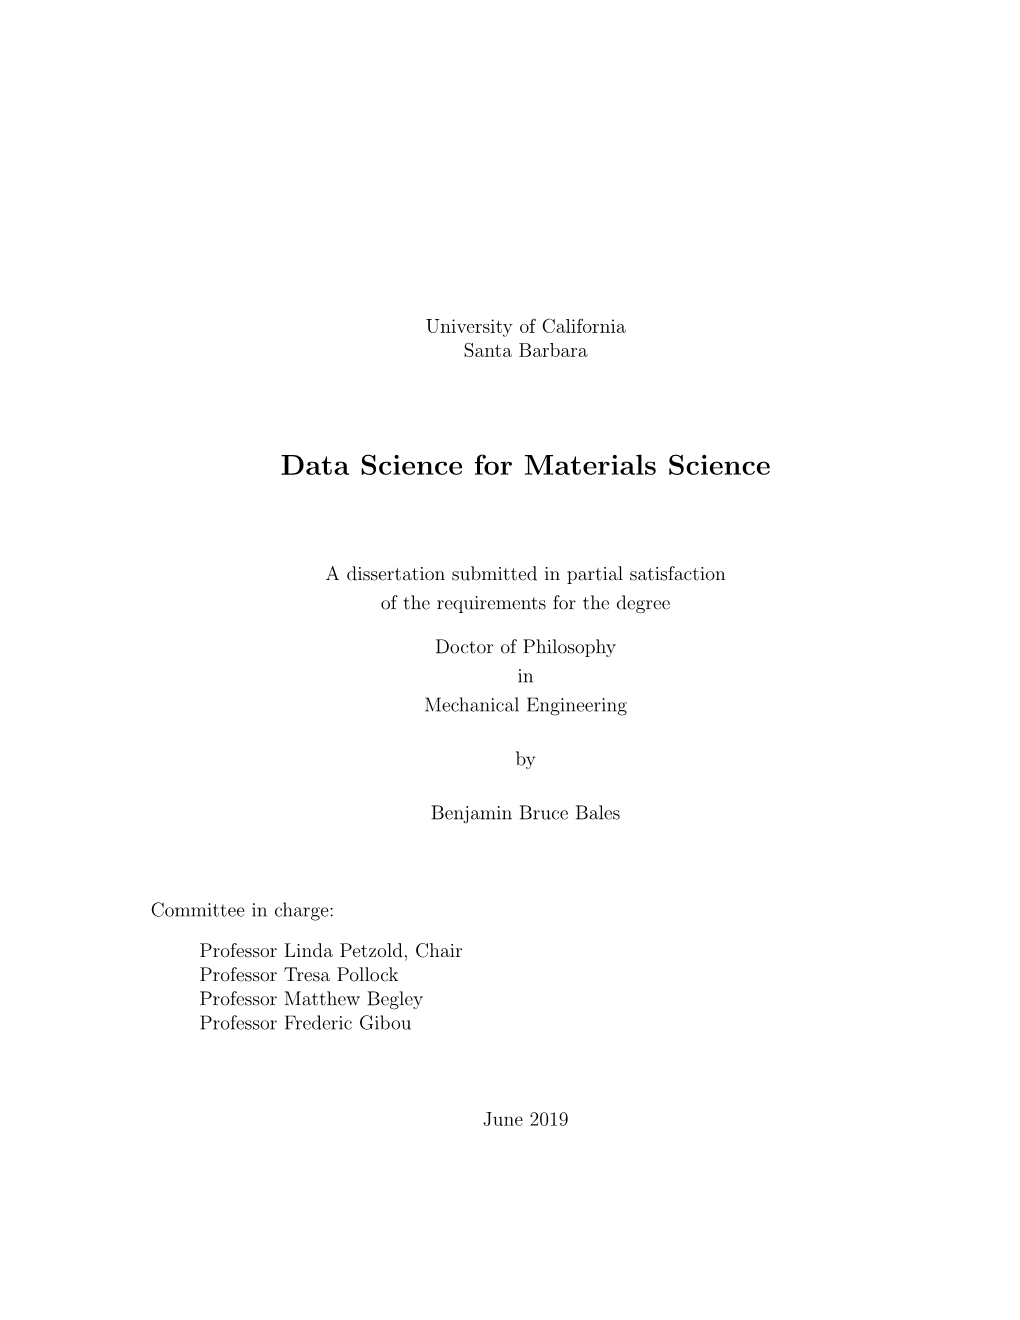 Data Science for Materials Science